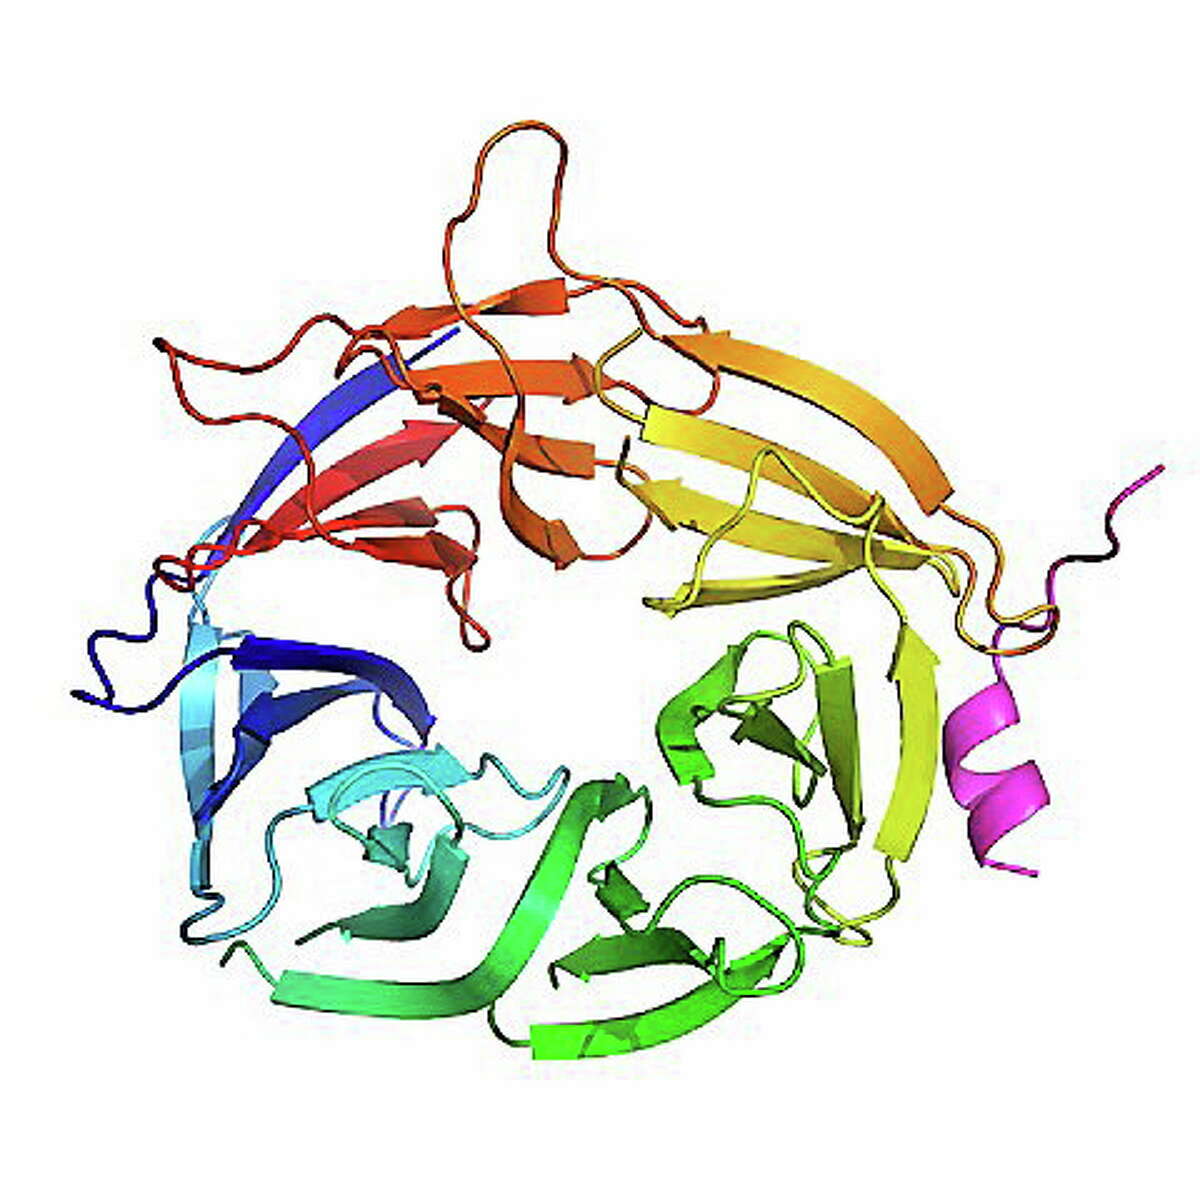 PALB2 protein as it bonds to, and interacts with, BRCA2.